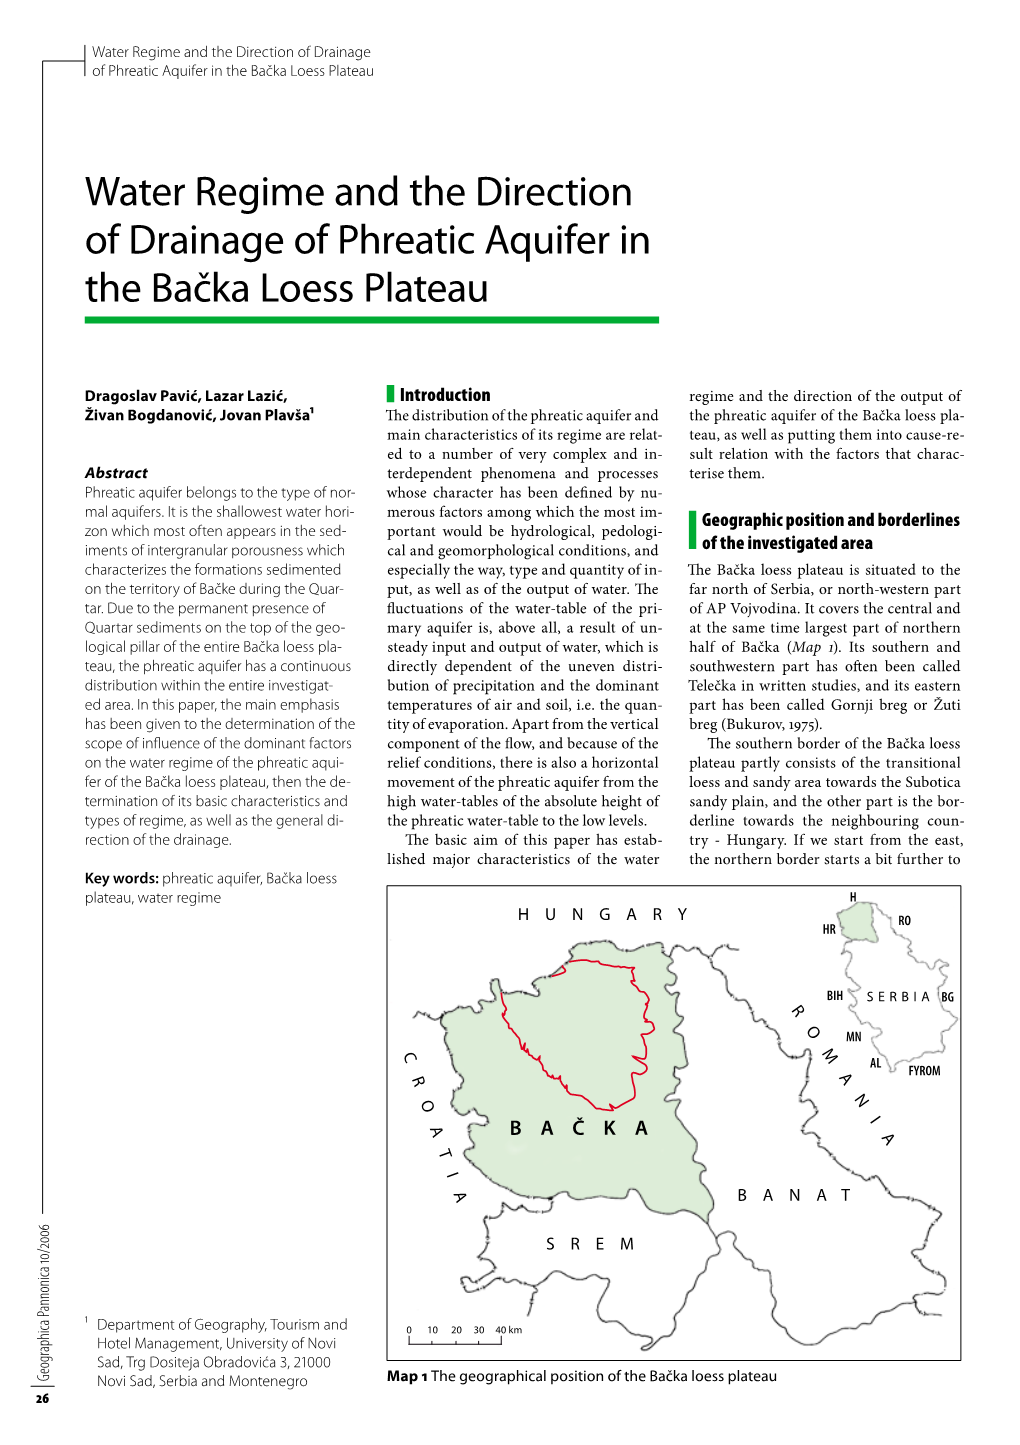 Water Regime and the Direction of Drainage of Phreatic Aquifer in the Bačka Loess Plateau